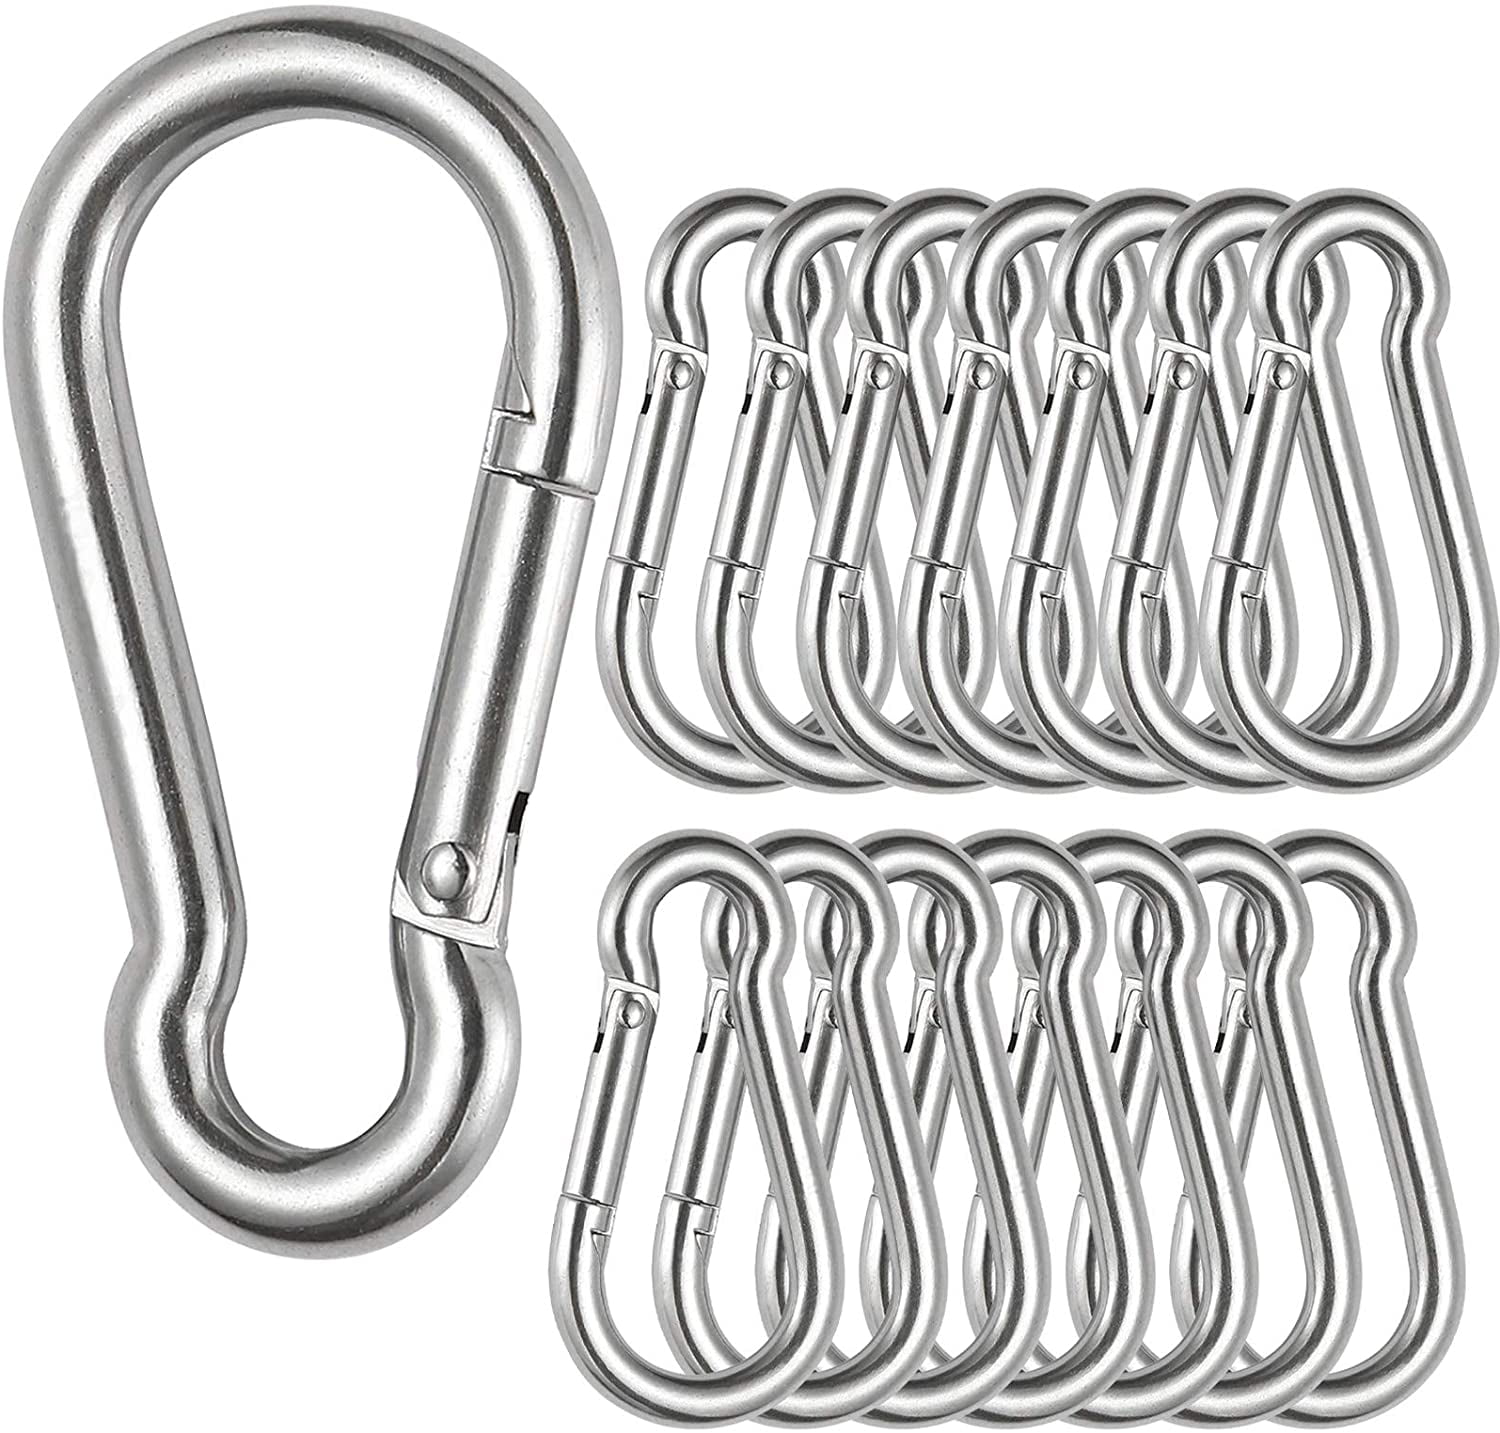 5X Mini Gear Snap Spring Clip Hook Quick Link Carabiner Keychain Tool Set^ 